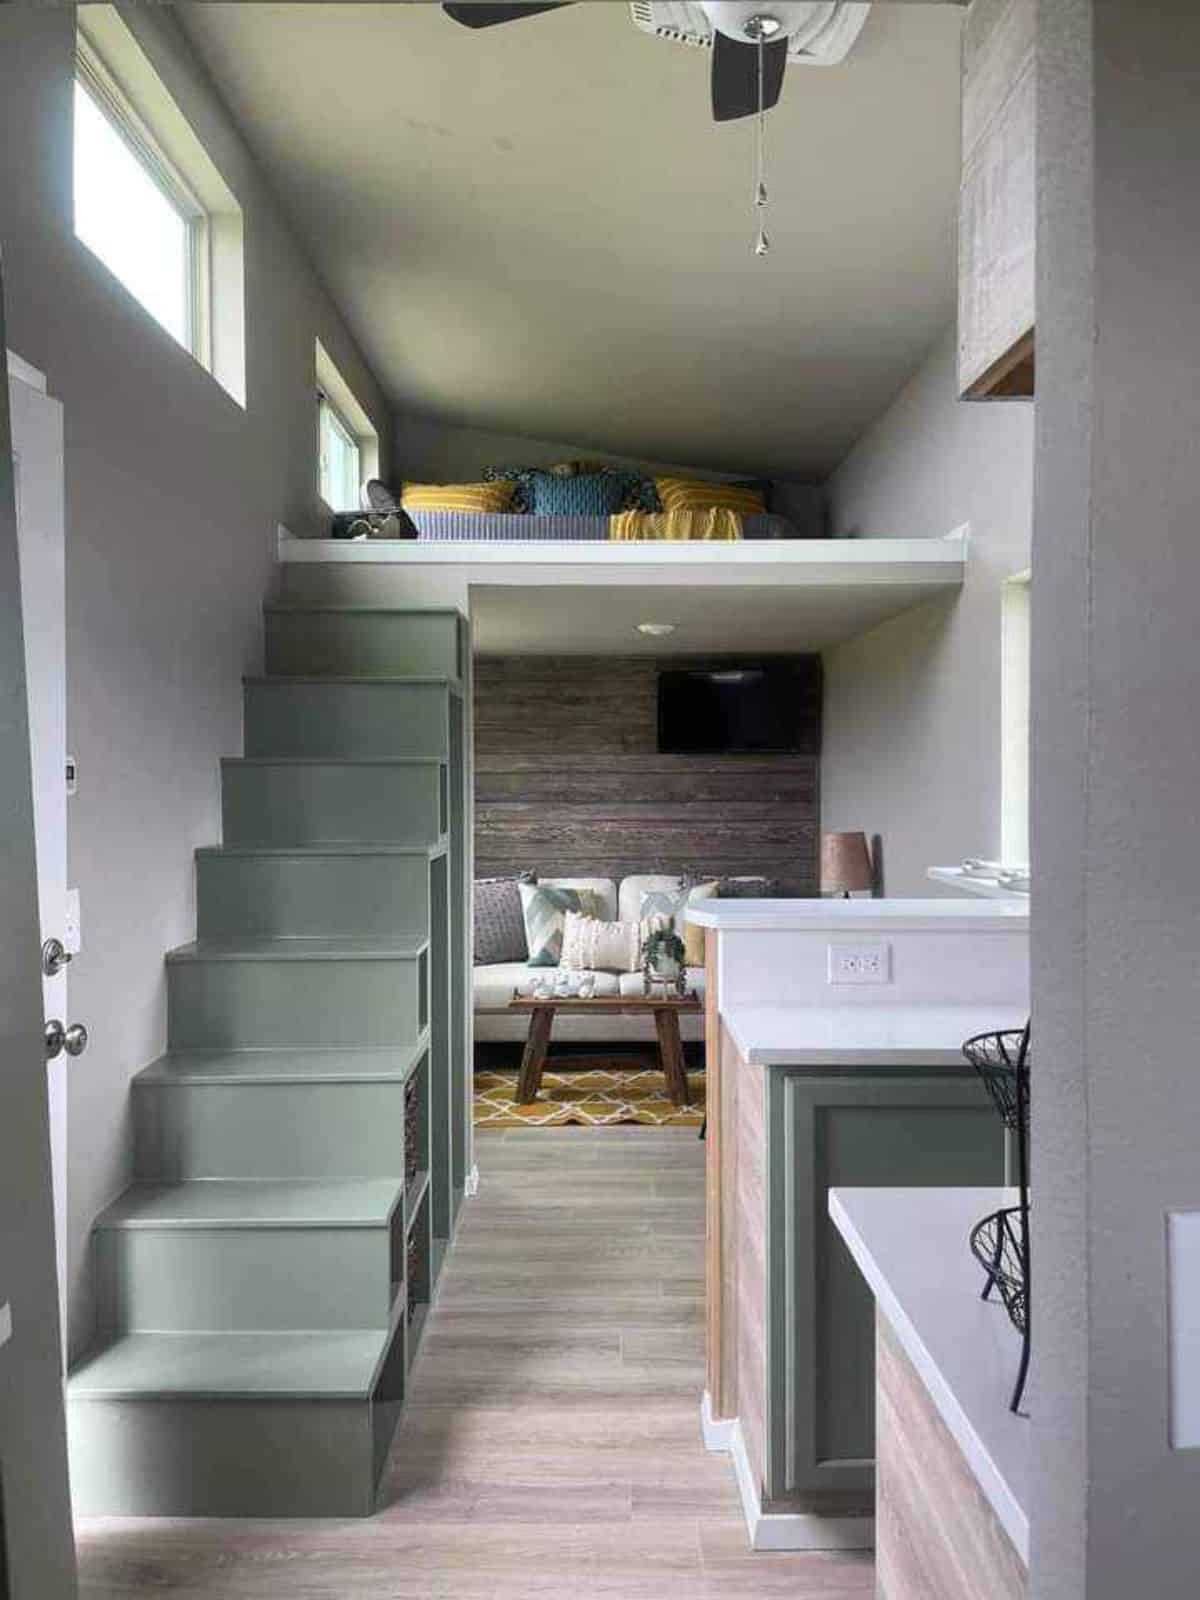 living area plus loft above the living area of 20’ tiny home